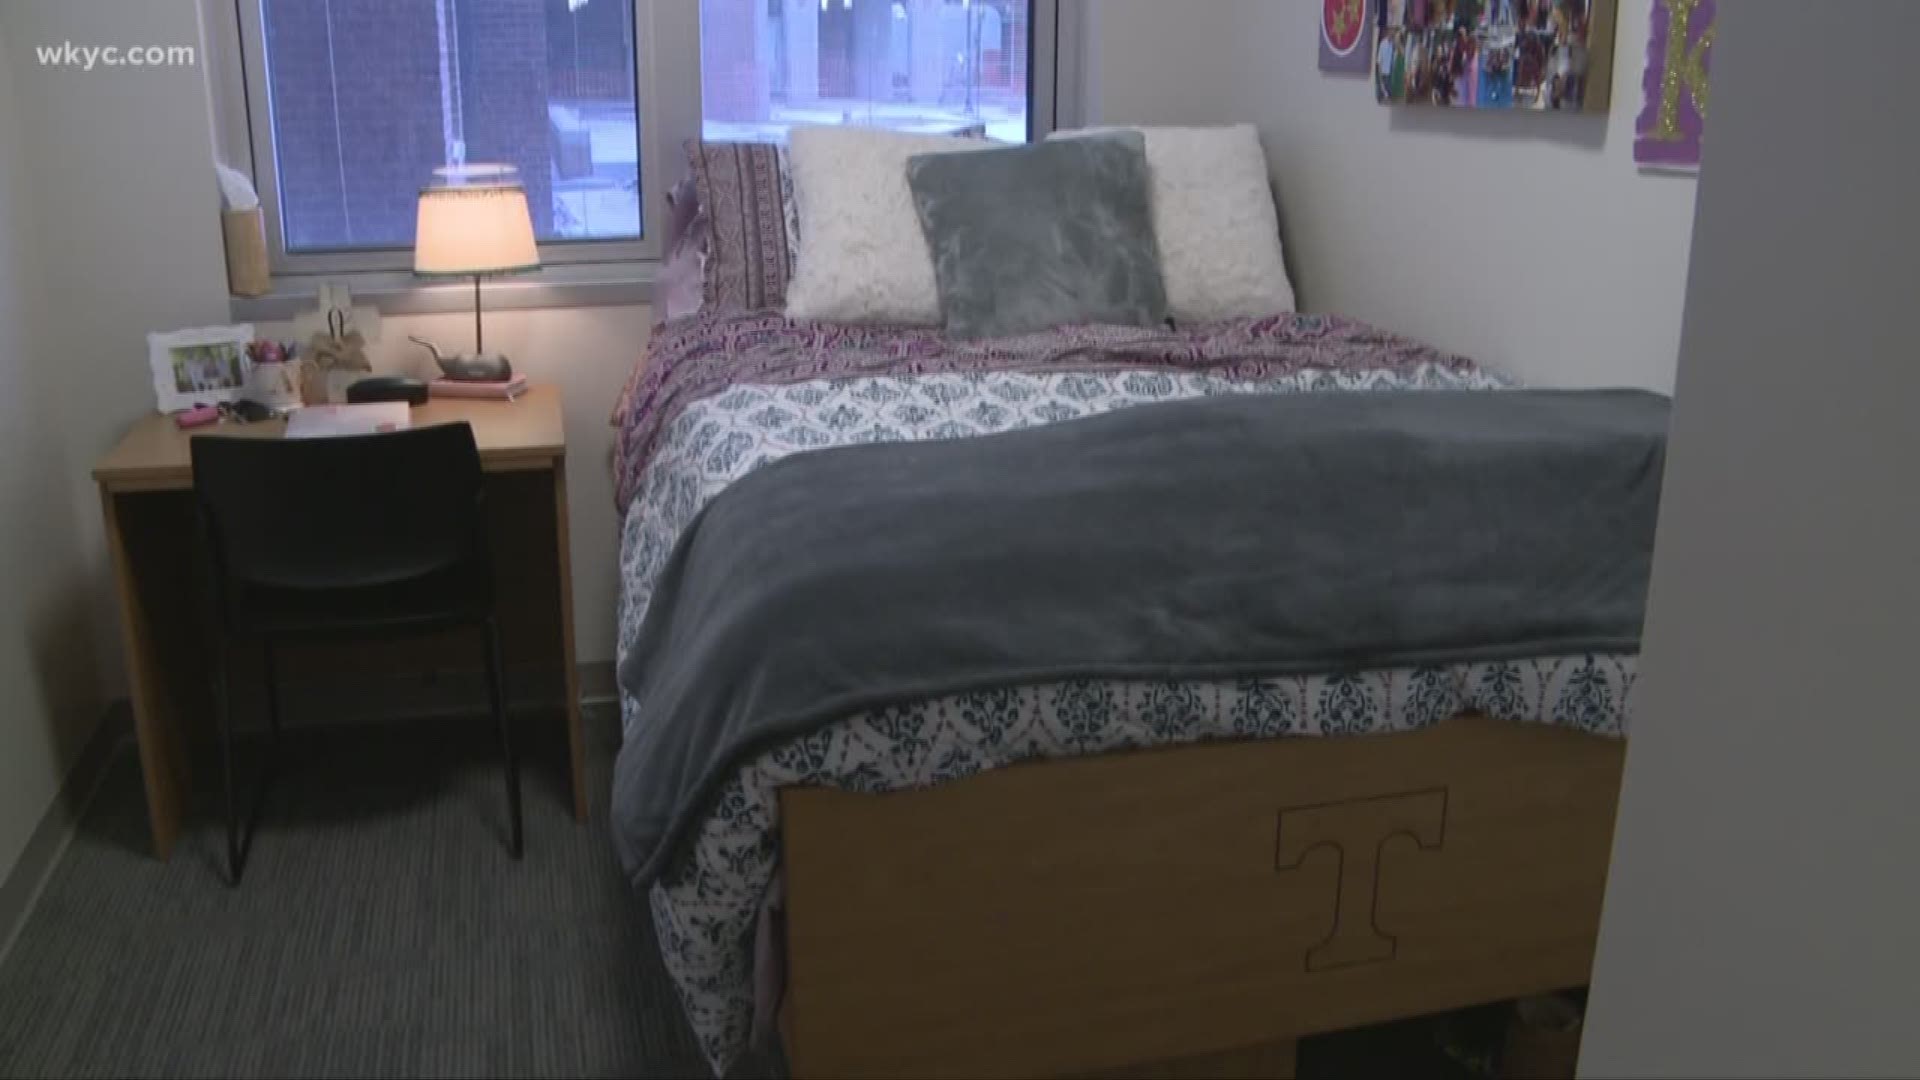 We found some affordable space savers and privacy products. Danielle Serino reports.